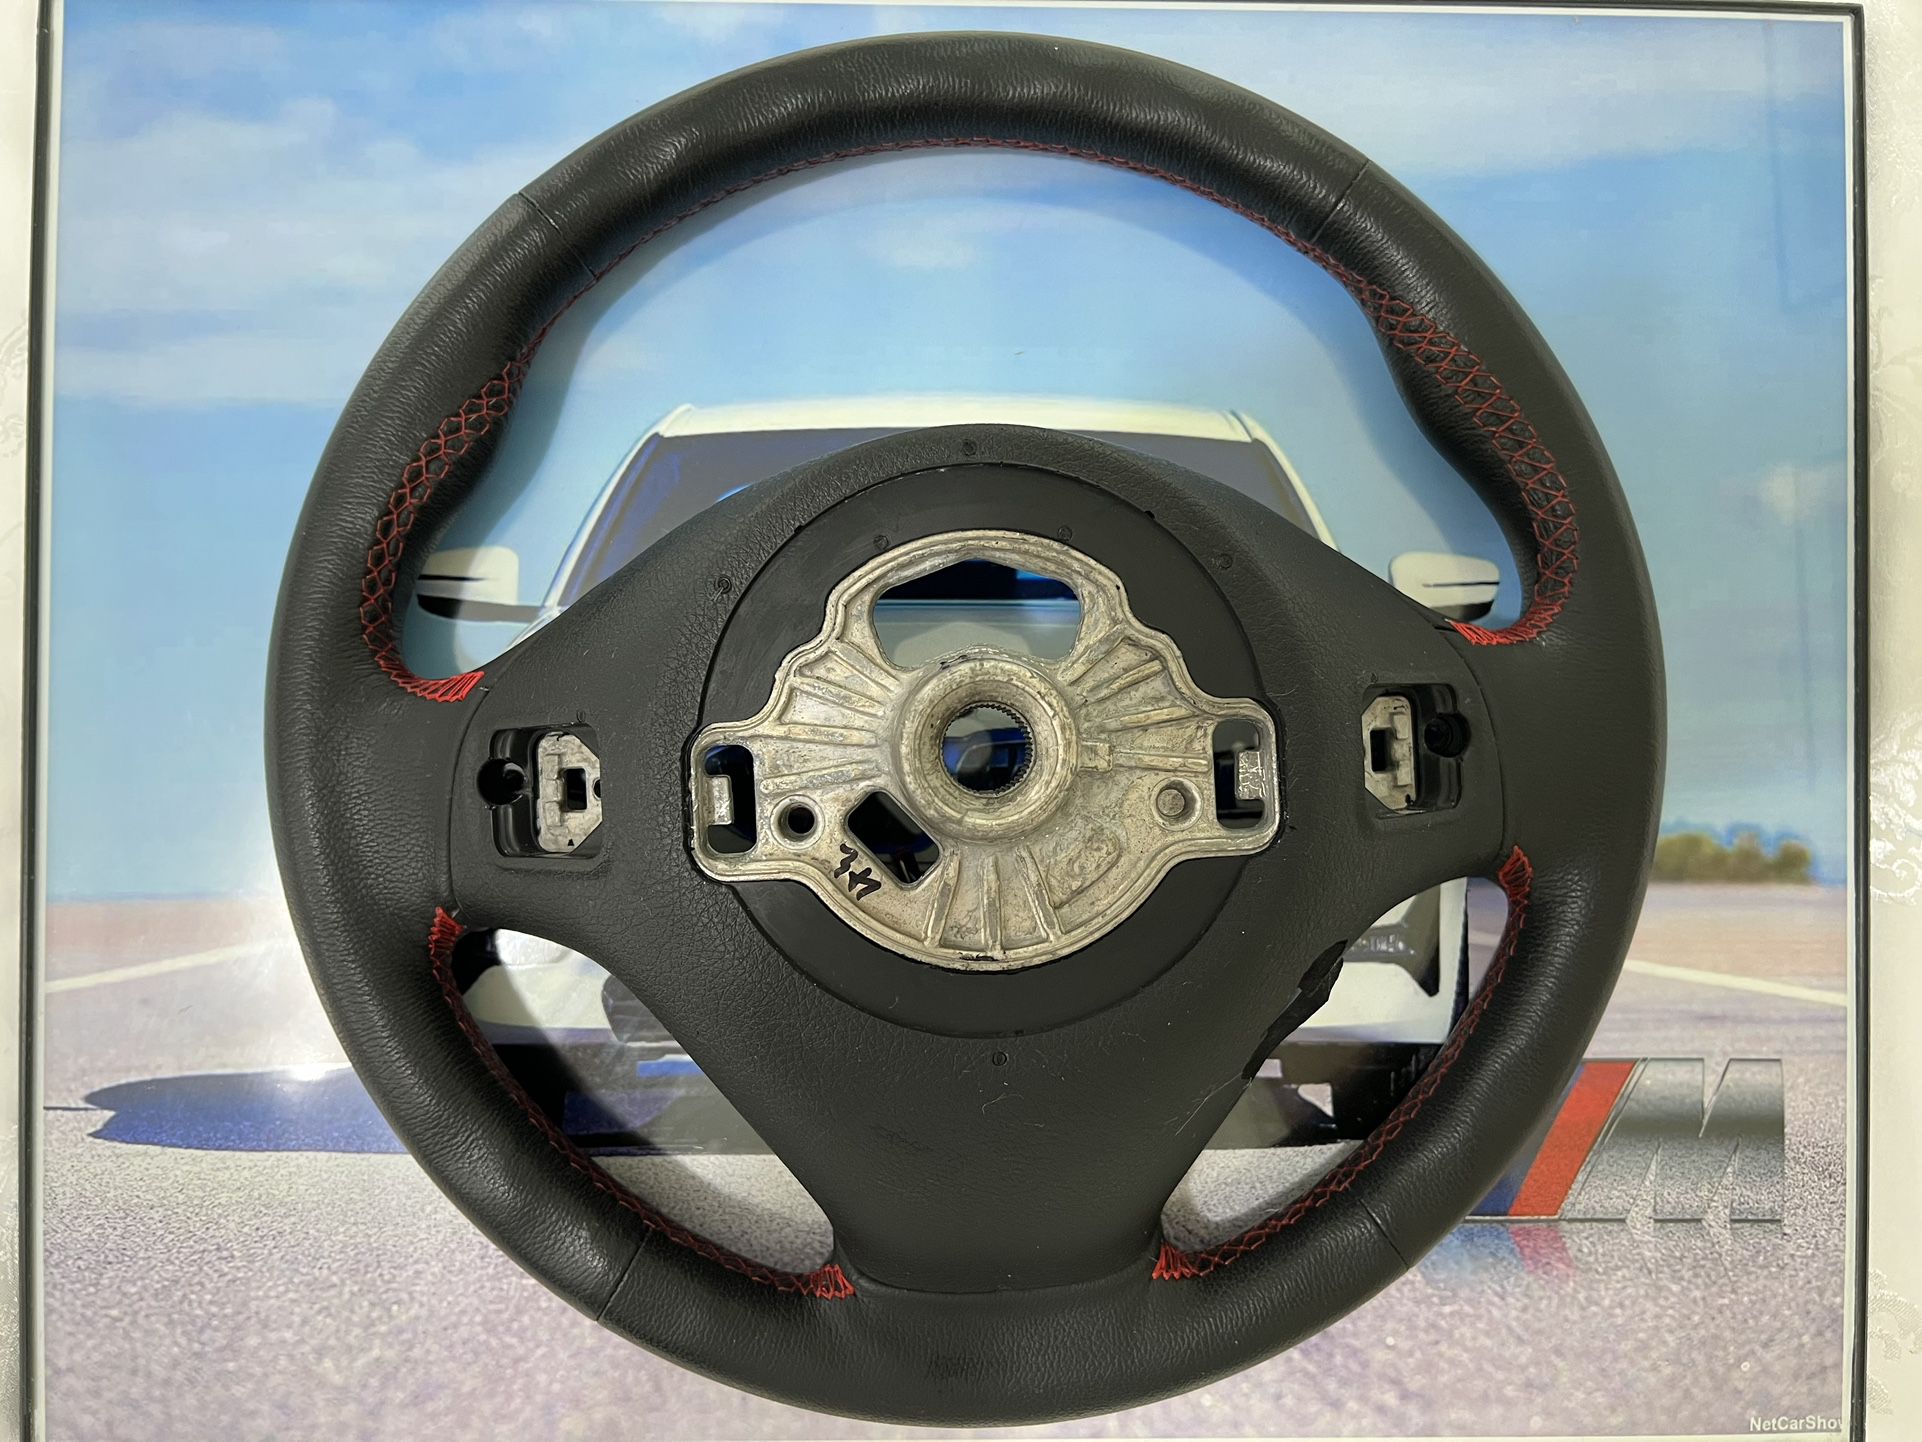 🌐 Genuine BMW F30 3 Series (2017) Steering Wheel (Used)  This is a GENUINE BMW Leather F30 Steering Wheel which came from a 2017 330i Sedan. It is bl